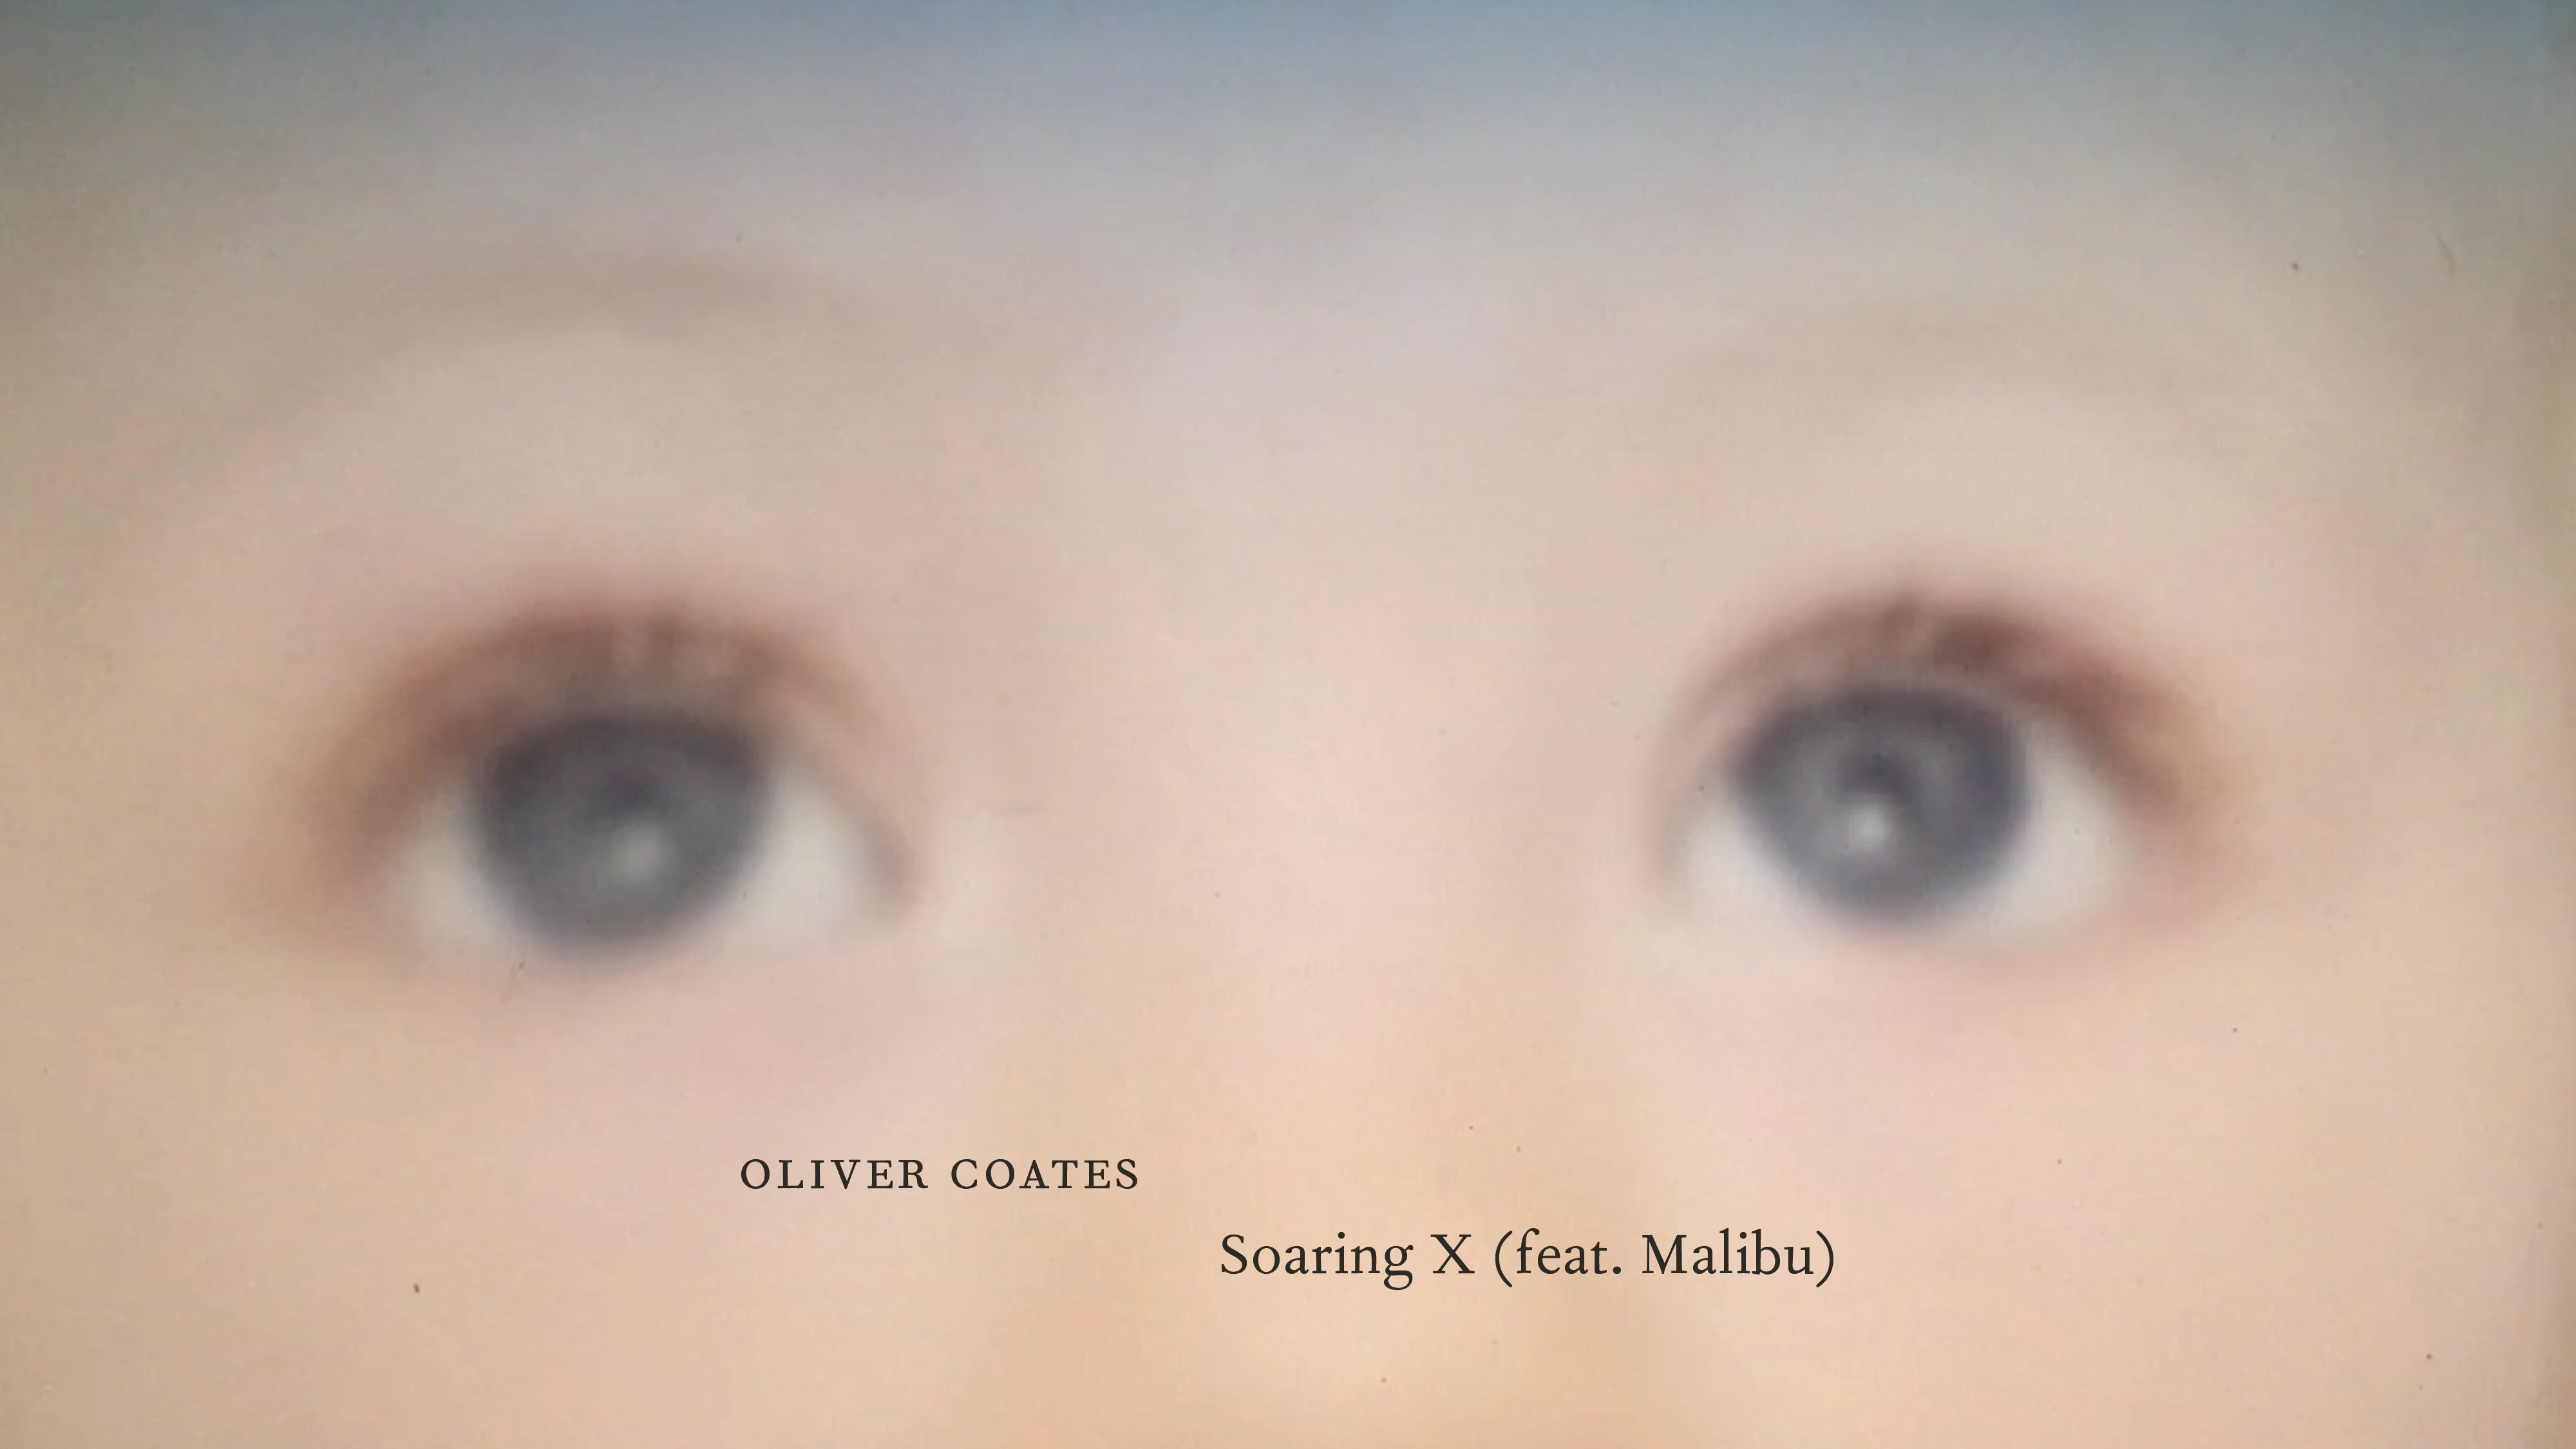 Link to Video for Oliver Coates – Soaring X (feat. Malibu)